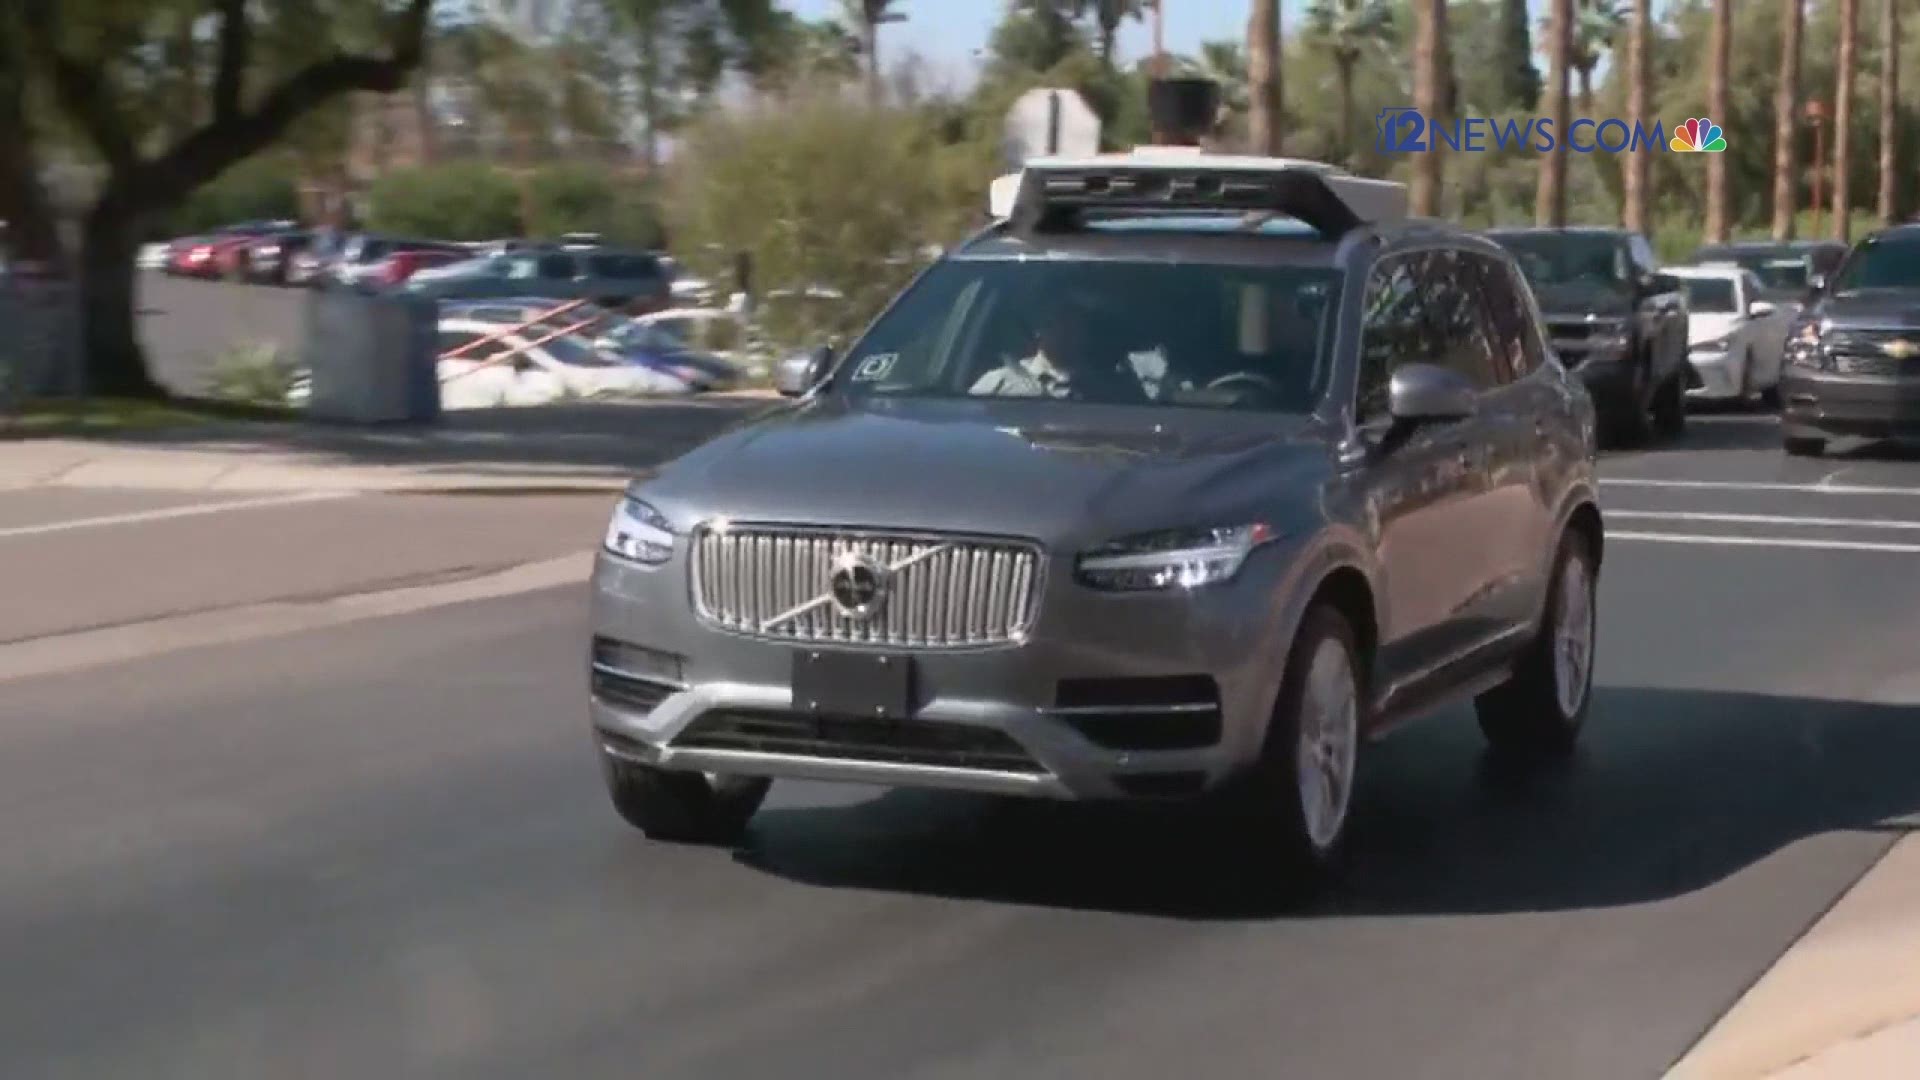 Uber has paused its self-driving operations across North America in the wake of the crash.